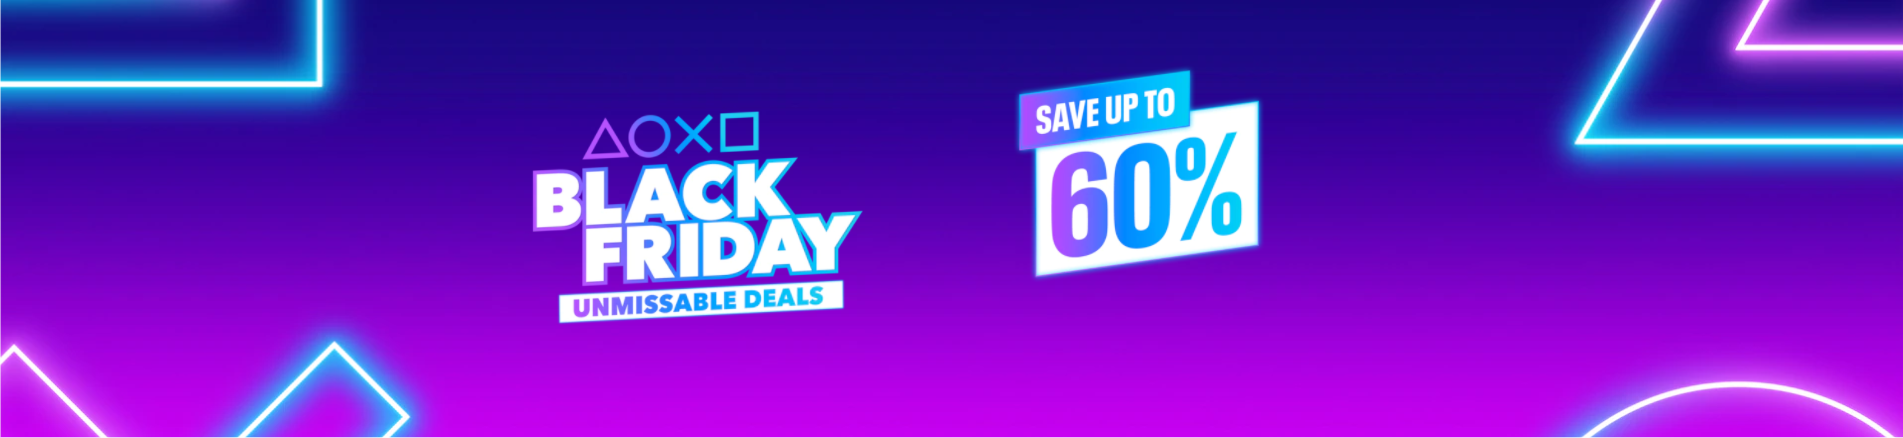 The best PlayStation Store Black Friday deals